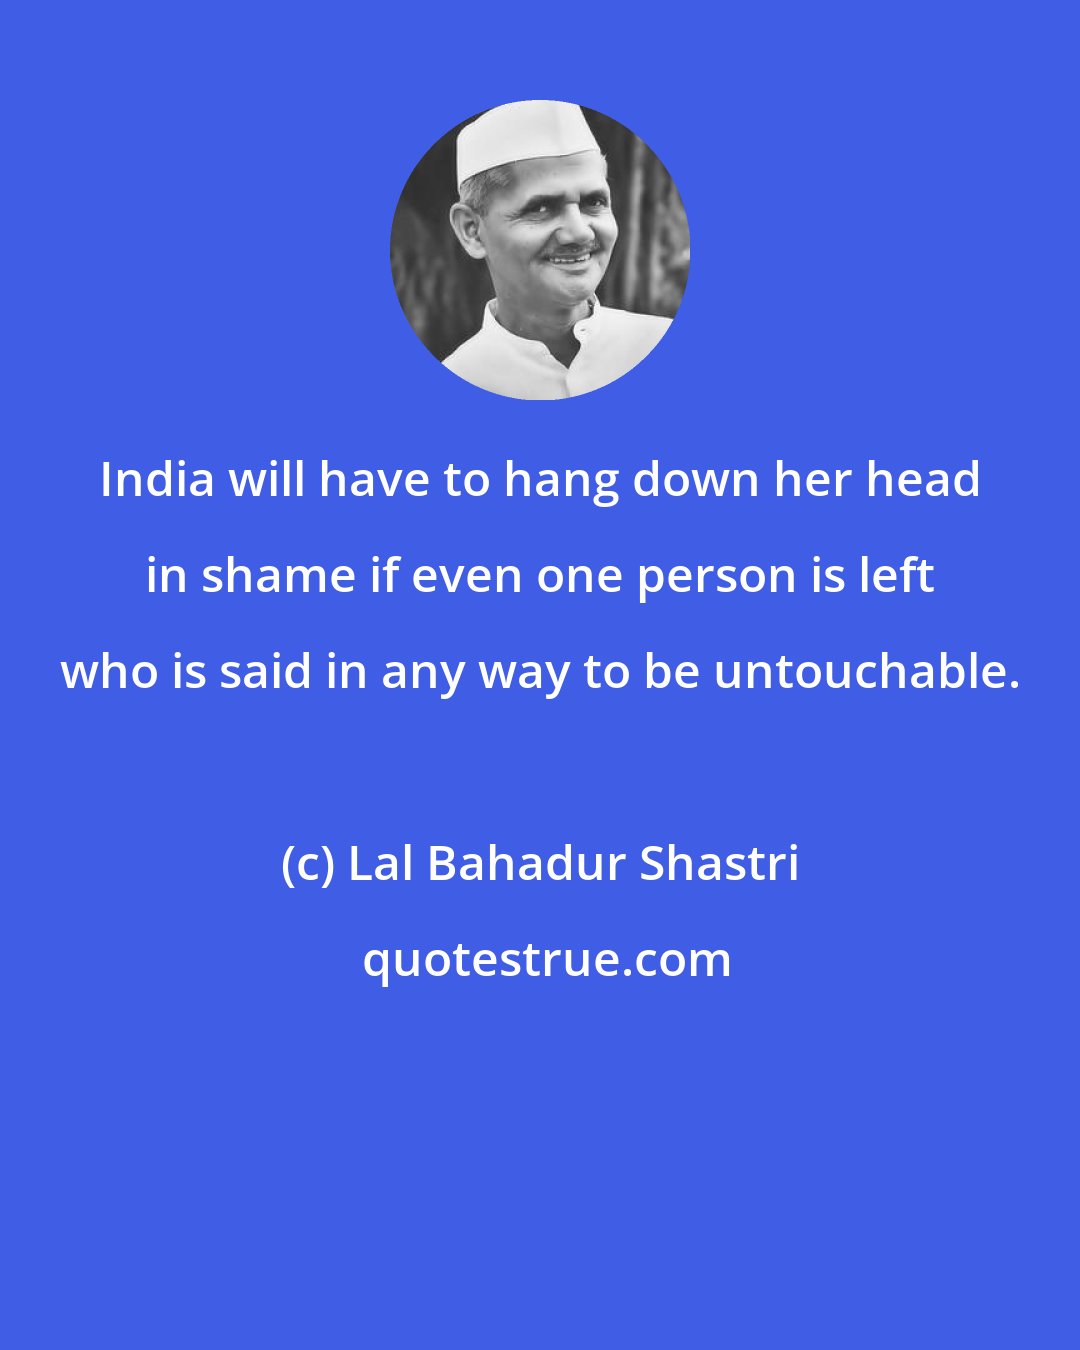 Lal Bahadur Shastri: India will have to hang down her head in shame if even one person is left who is said in any way to be untouchable.